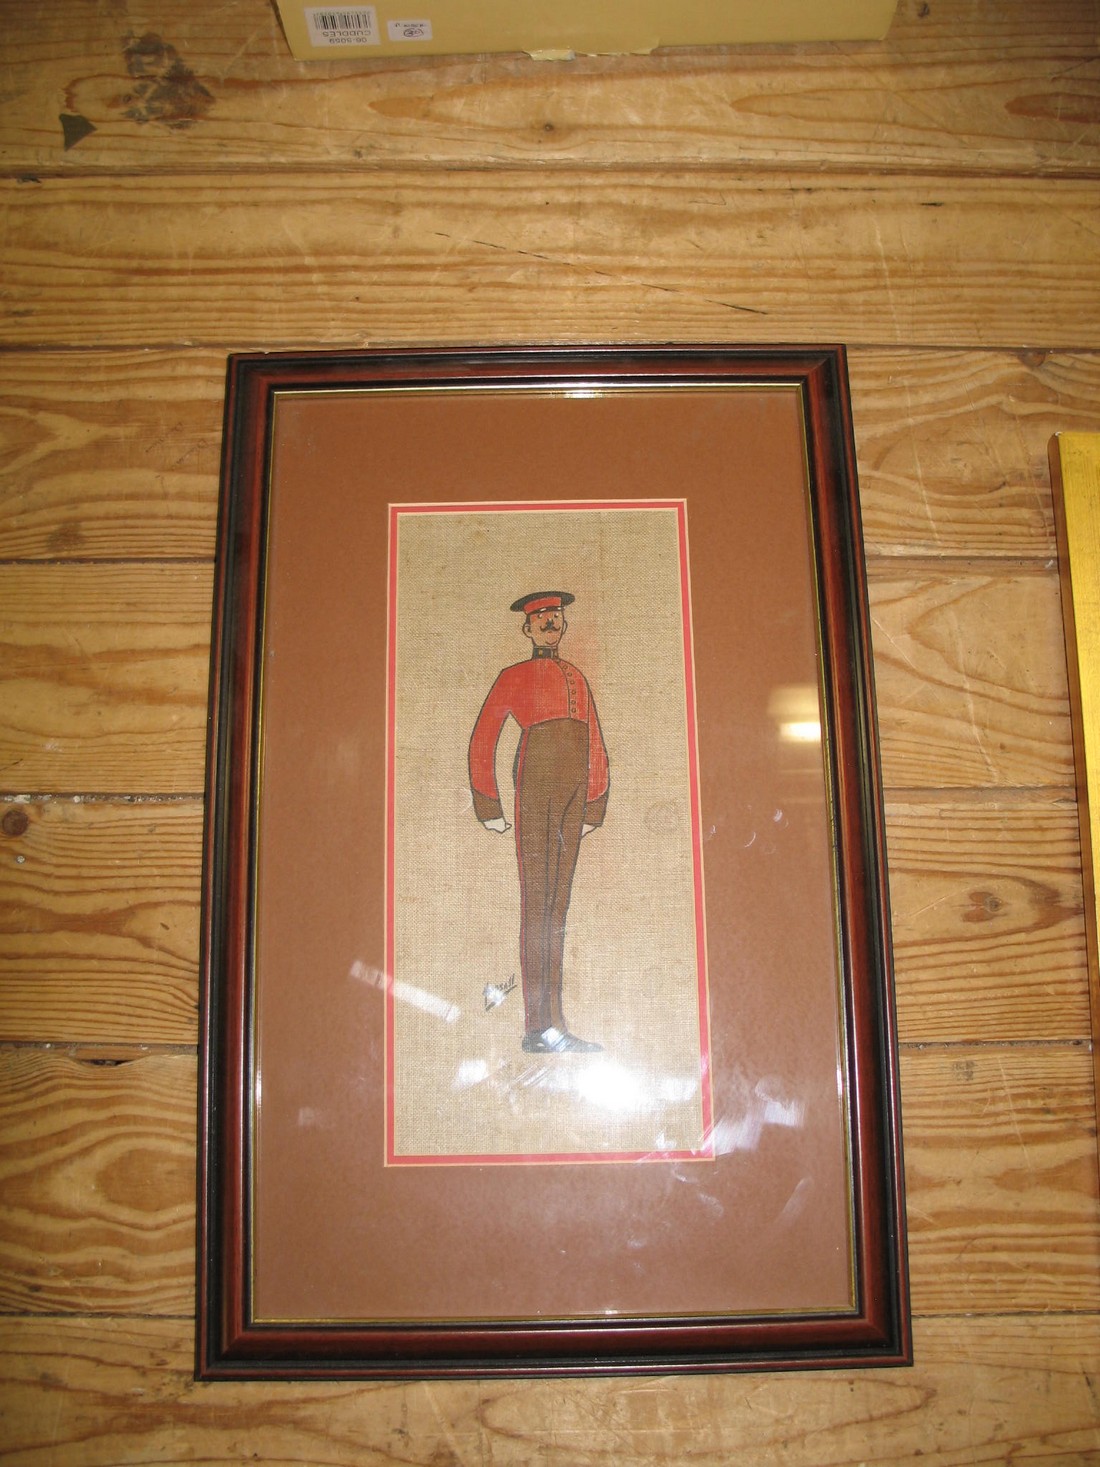 HASSALL (John) a hand-col'd woodblock print of a soldier, on canvas, the front of a calendar (see